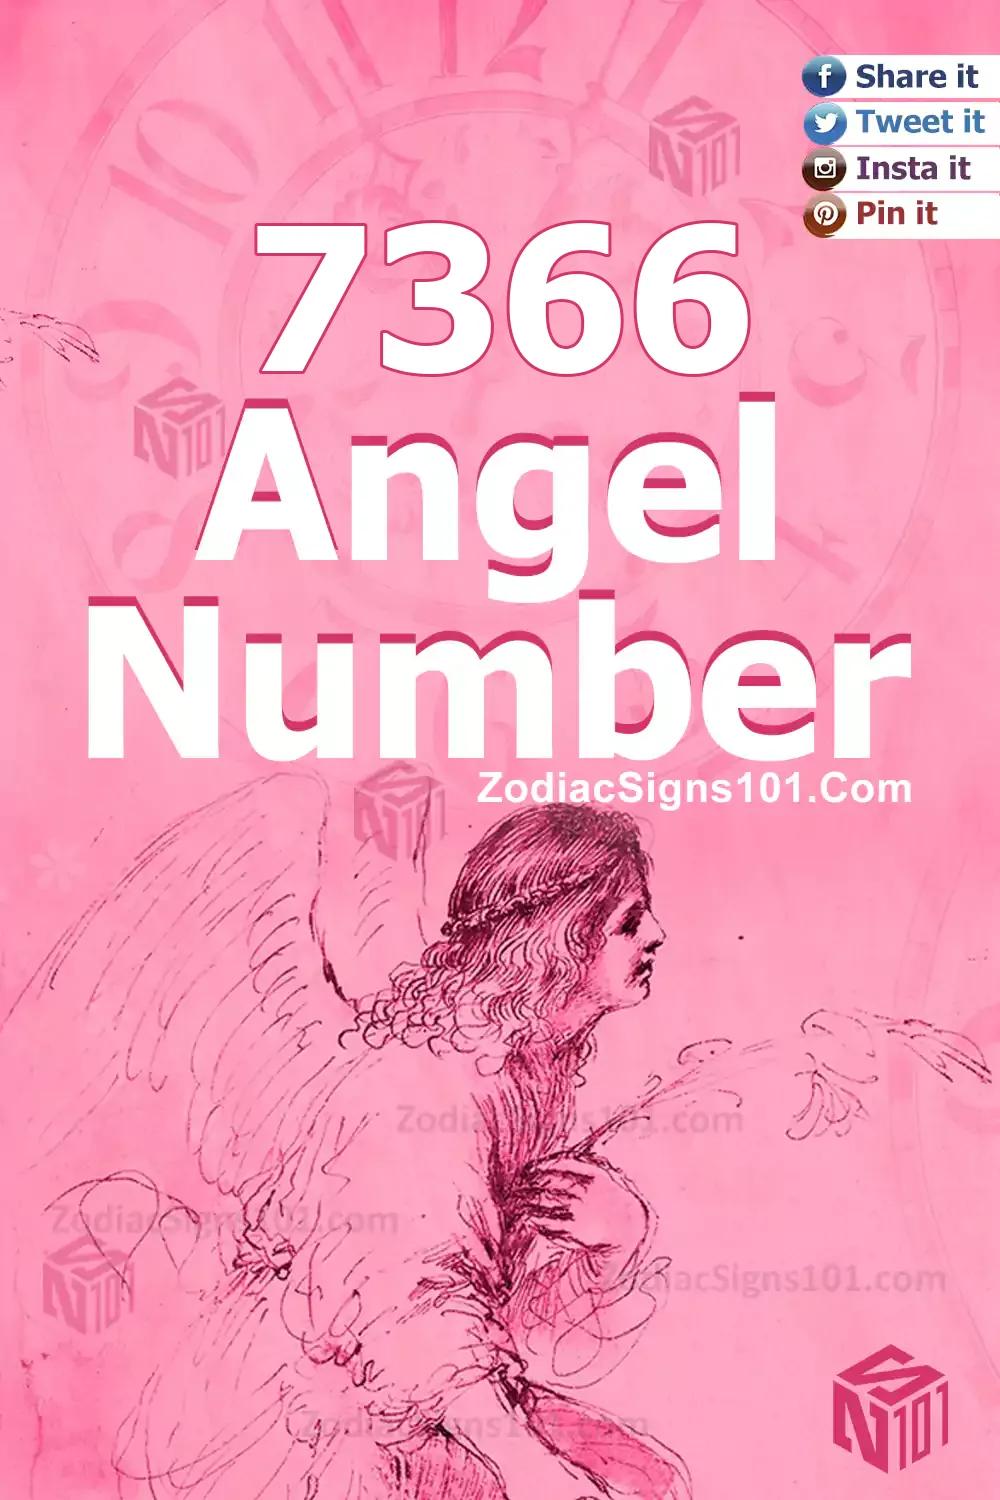 7366 Angel Number Meaning